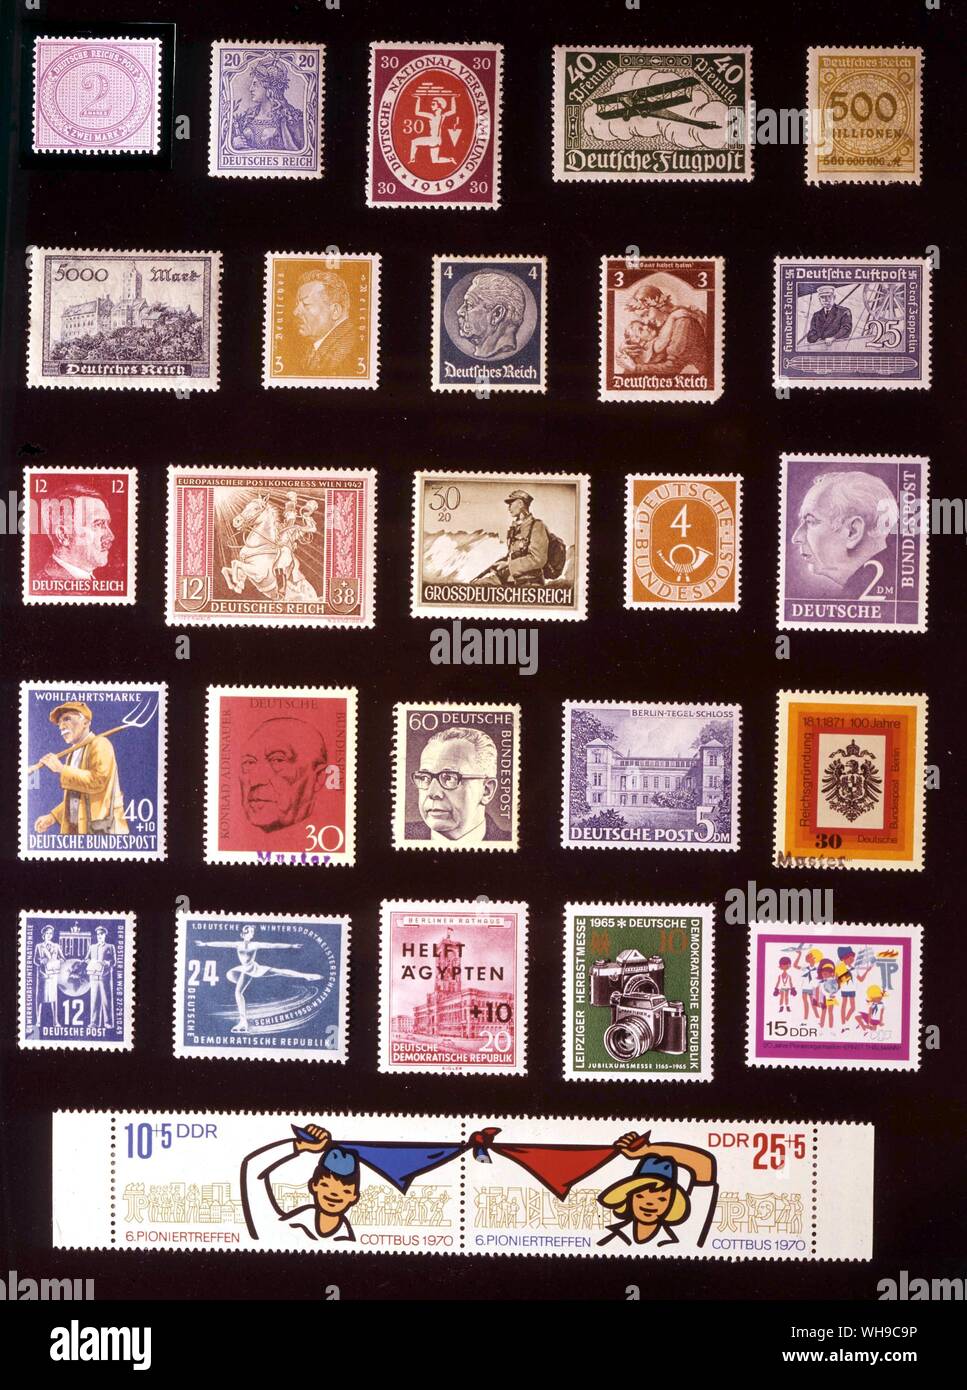 EUROPE - GERMANY: (left to right) 1. German Empire, 2 marks, 1875, 2. German Empire, 20 pfennigs, 1902, 3. German Republic, 30 pfennigs, 1920, 4. 40 pfennigs, 1919, 5. 500 million marks, 1923, 6. 5,000 marks, 1823, 7. 3 pfennigs, 1928, 8. 4 pfennigs, 1932, 9. 3 pfennigs, 1935, 10. 25 pfennigs, 1938, 11. 12 pfennigs, 1942, 12. 12 + 38 pfennigs, 1942, 13. 30 + 20 pfennigs, 1944, 14. German Federal Republic, 4 pfennigs, 1951, 15. 2 deutschemarks, 1954, 16. 40 + 10 pfennigs, 1958, 17. 30 pfennigs, 1968, 18. 60 pfennigs, 1971, 19. West Berlin, 5 deutschemarks, 1953, 20. West Berlin, 30 pfennigs, Stock Photo